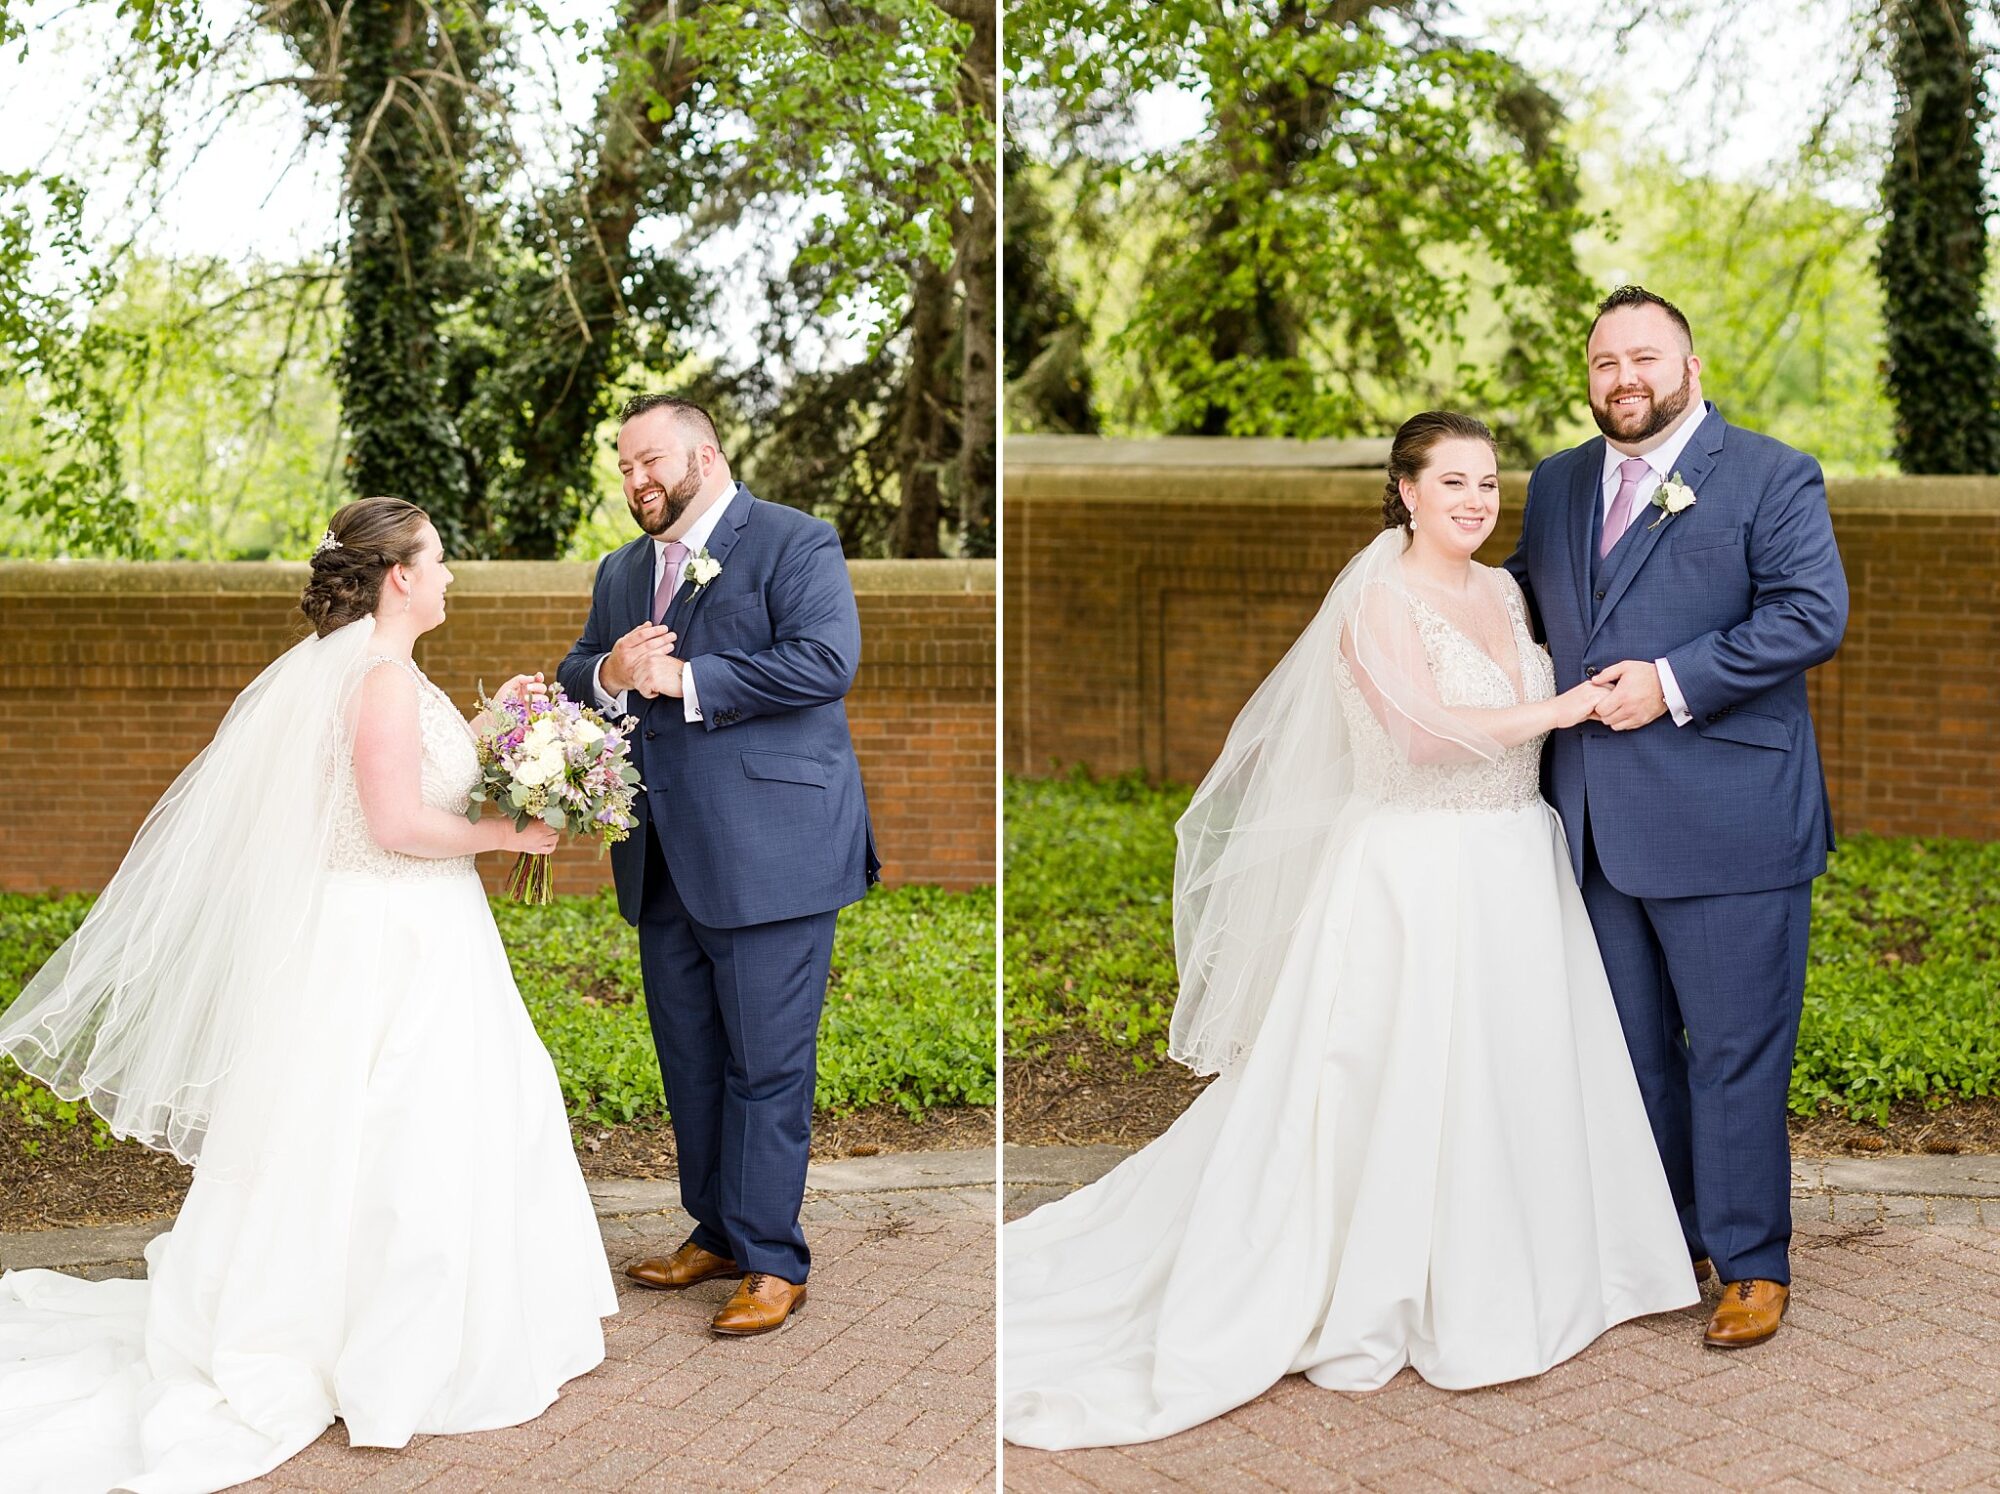 Record Box Loft outdoor portraits of bride and groom